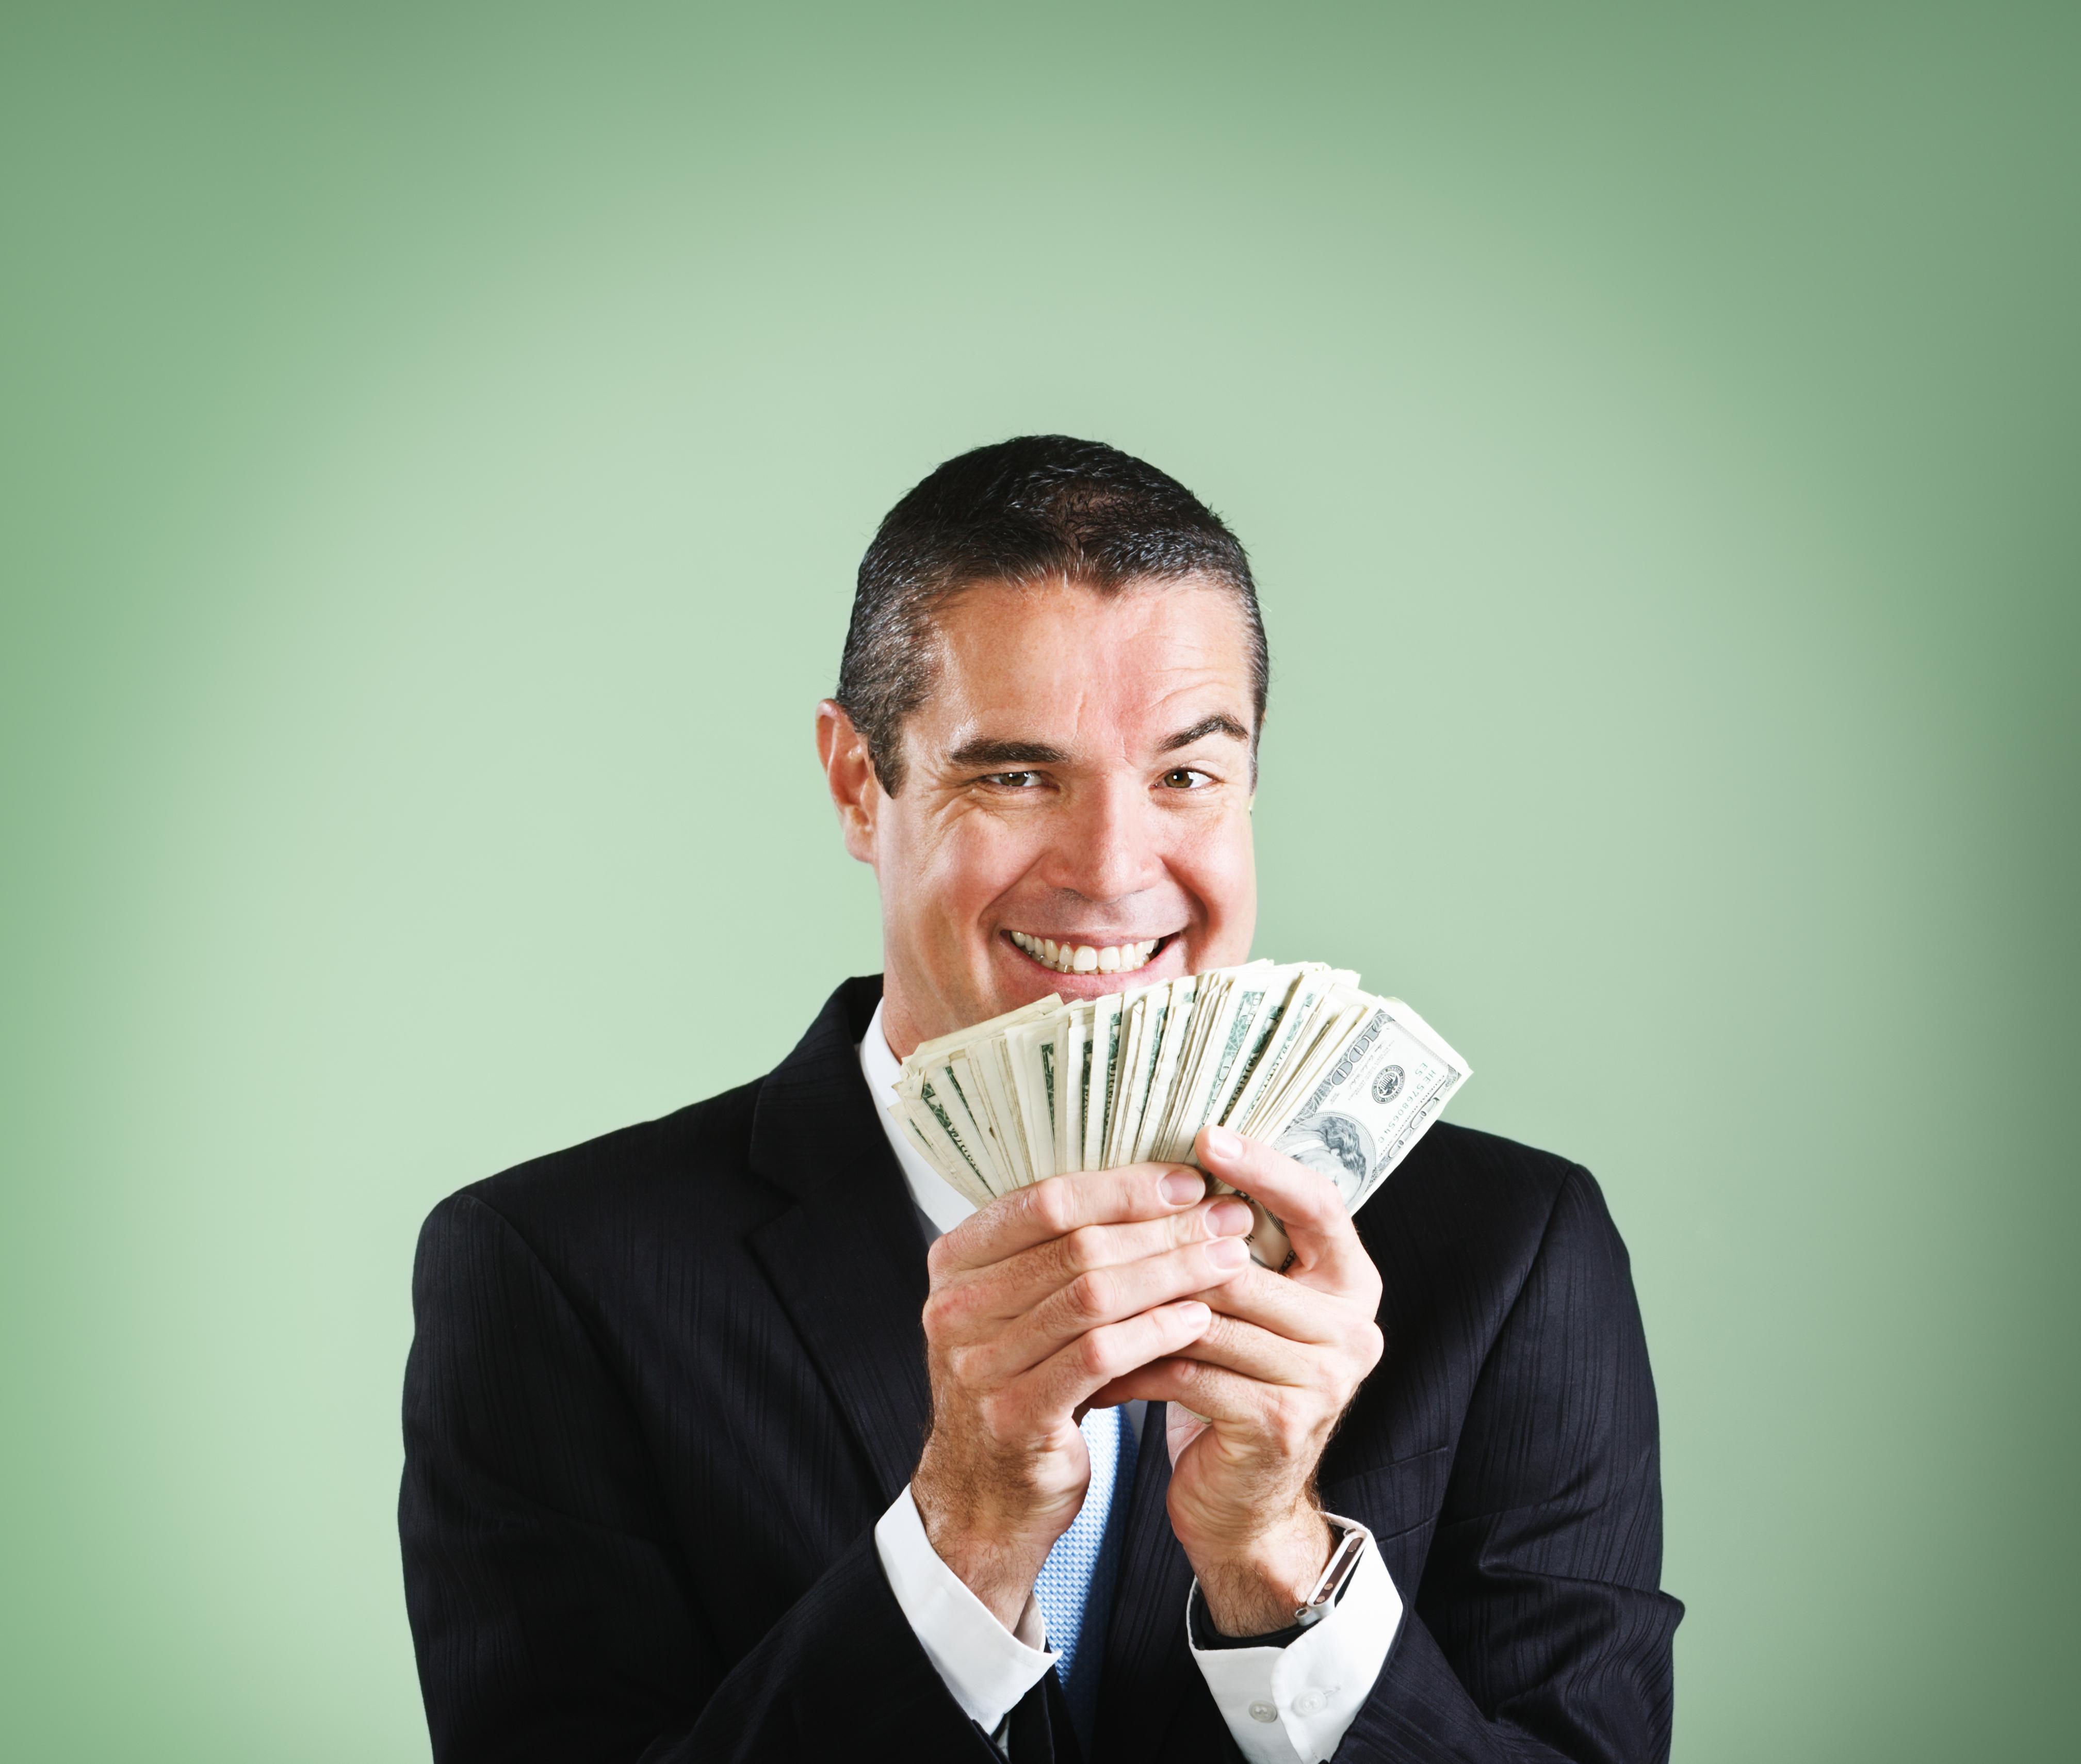 A happy man holding money | Source: Getty Images